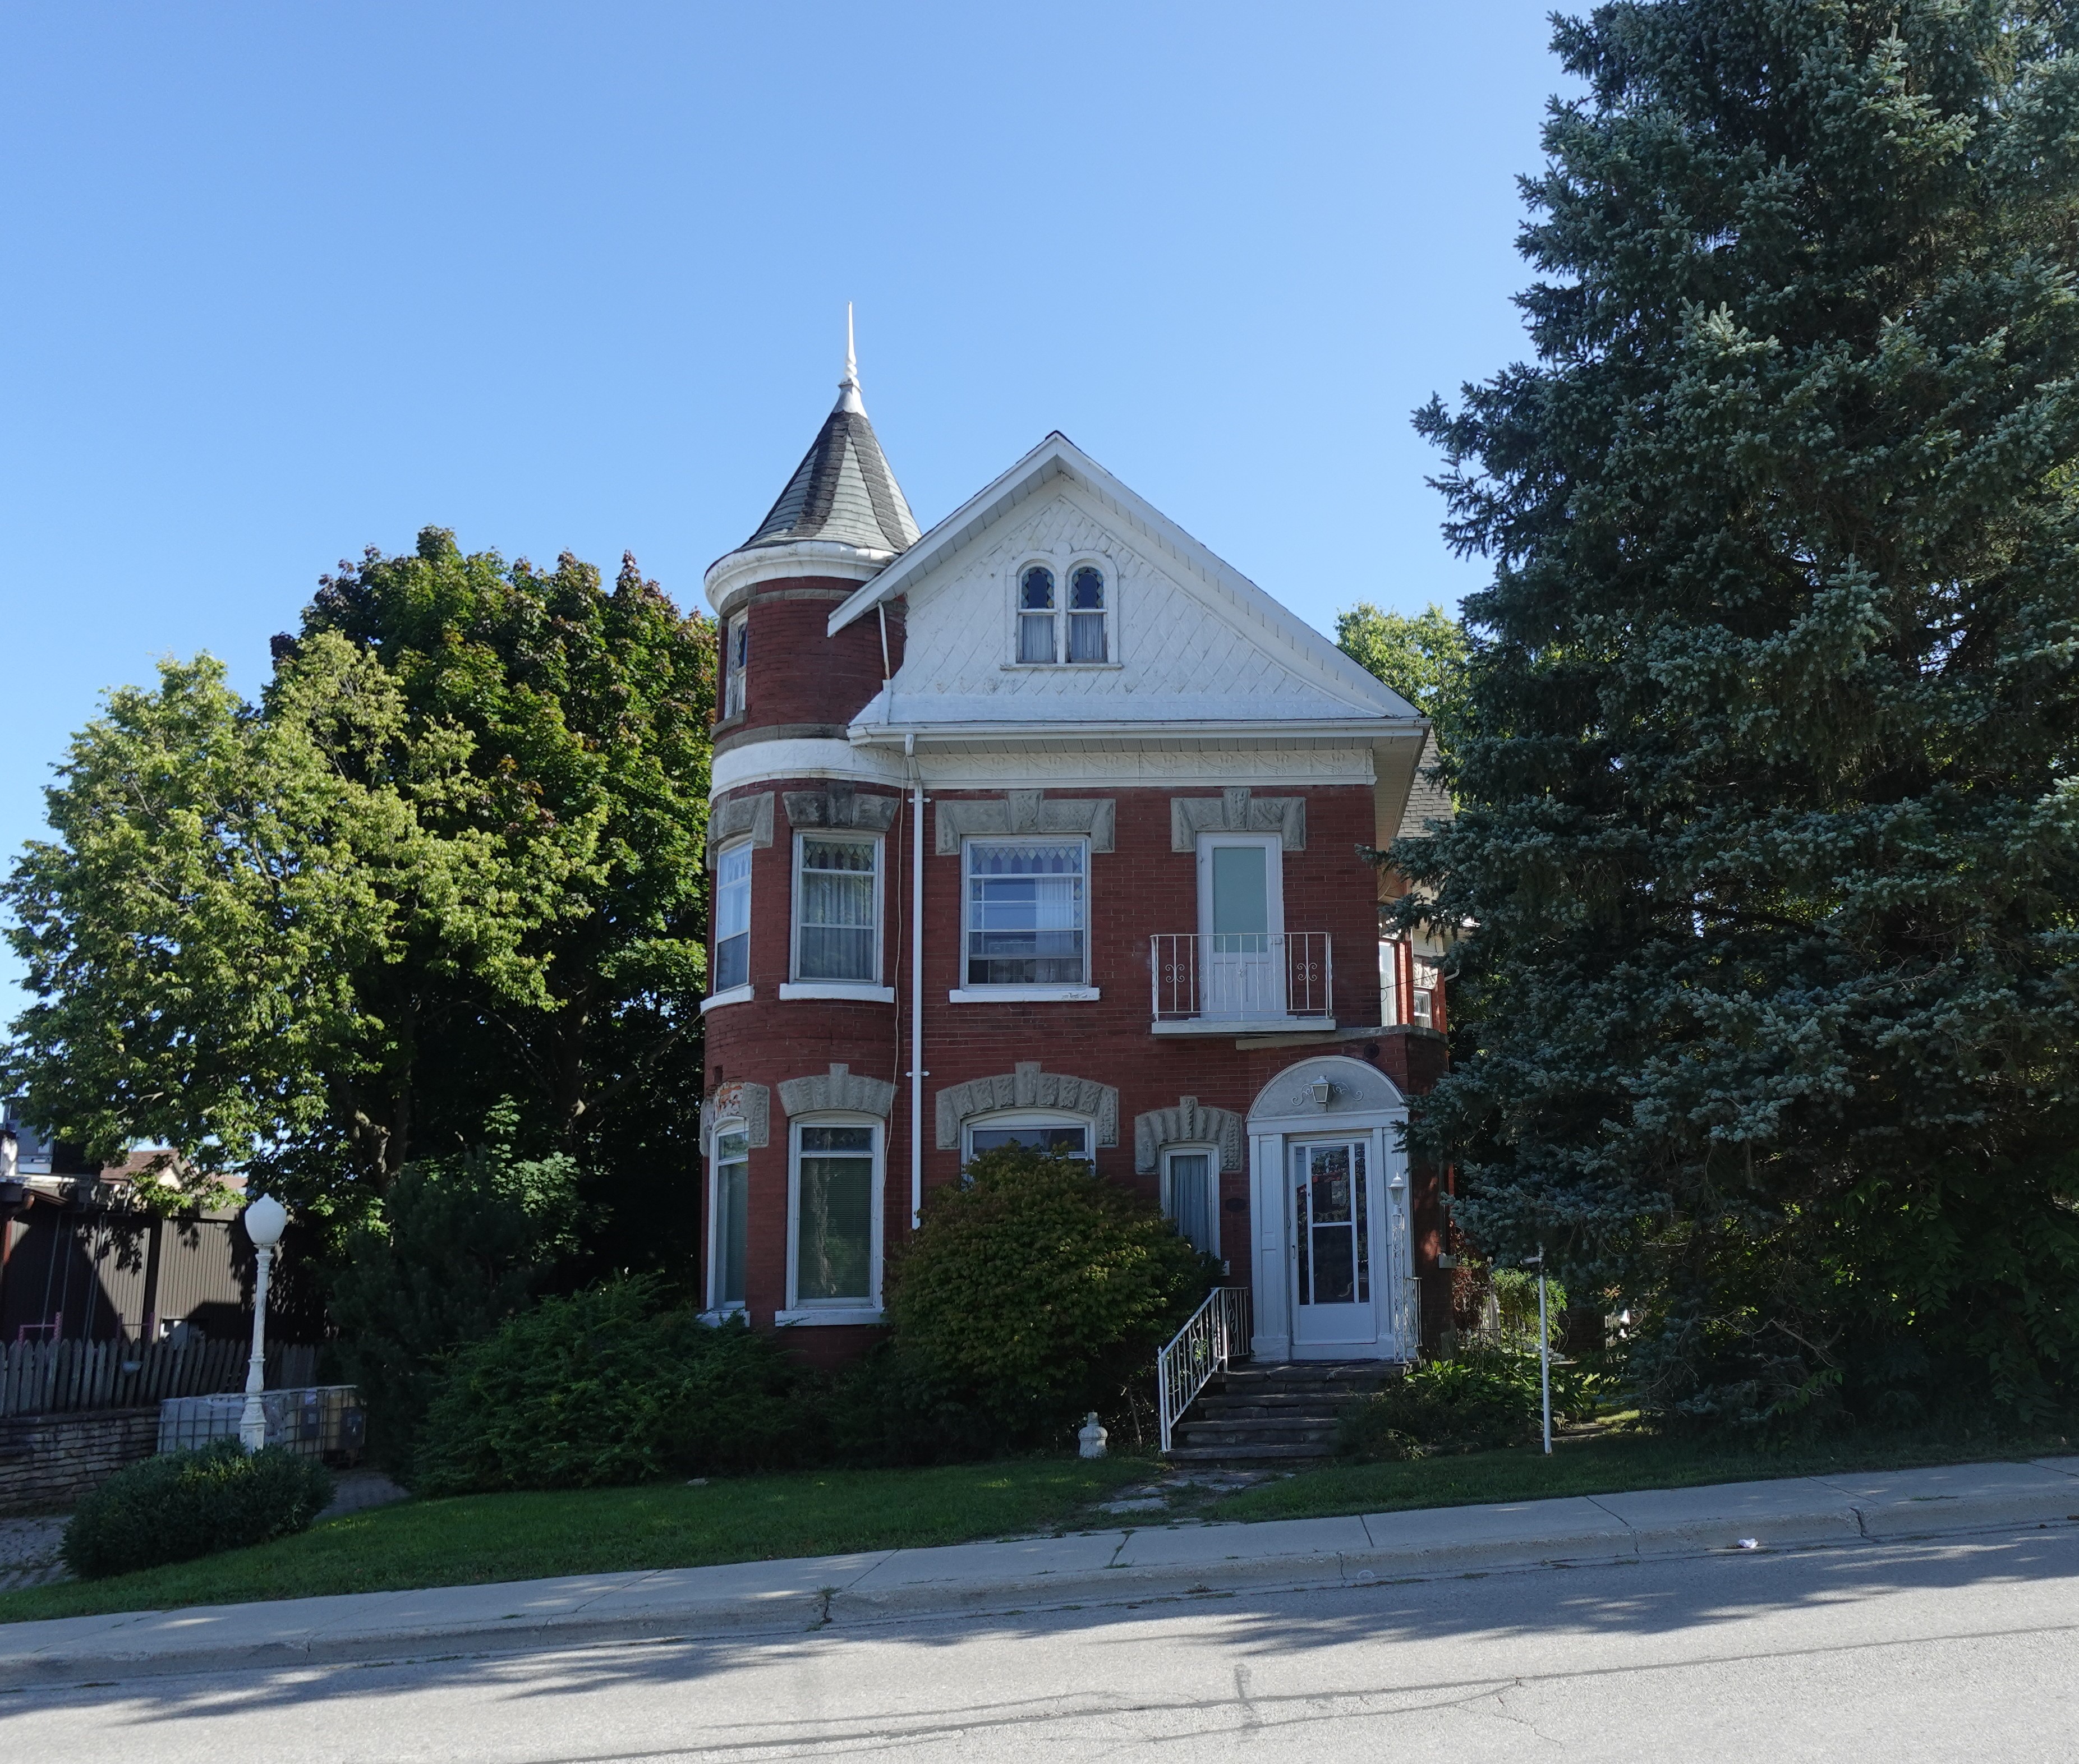 A photo of the Richard Clegg house in Wingham, Ontario